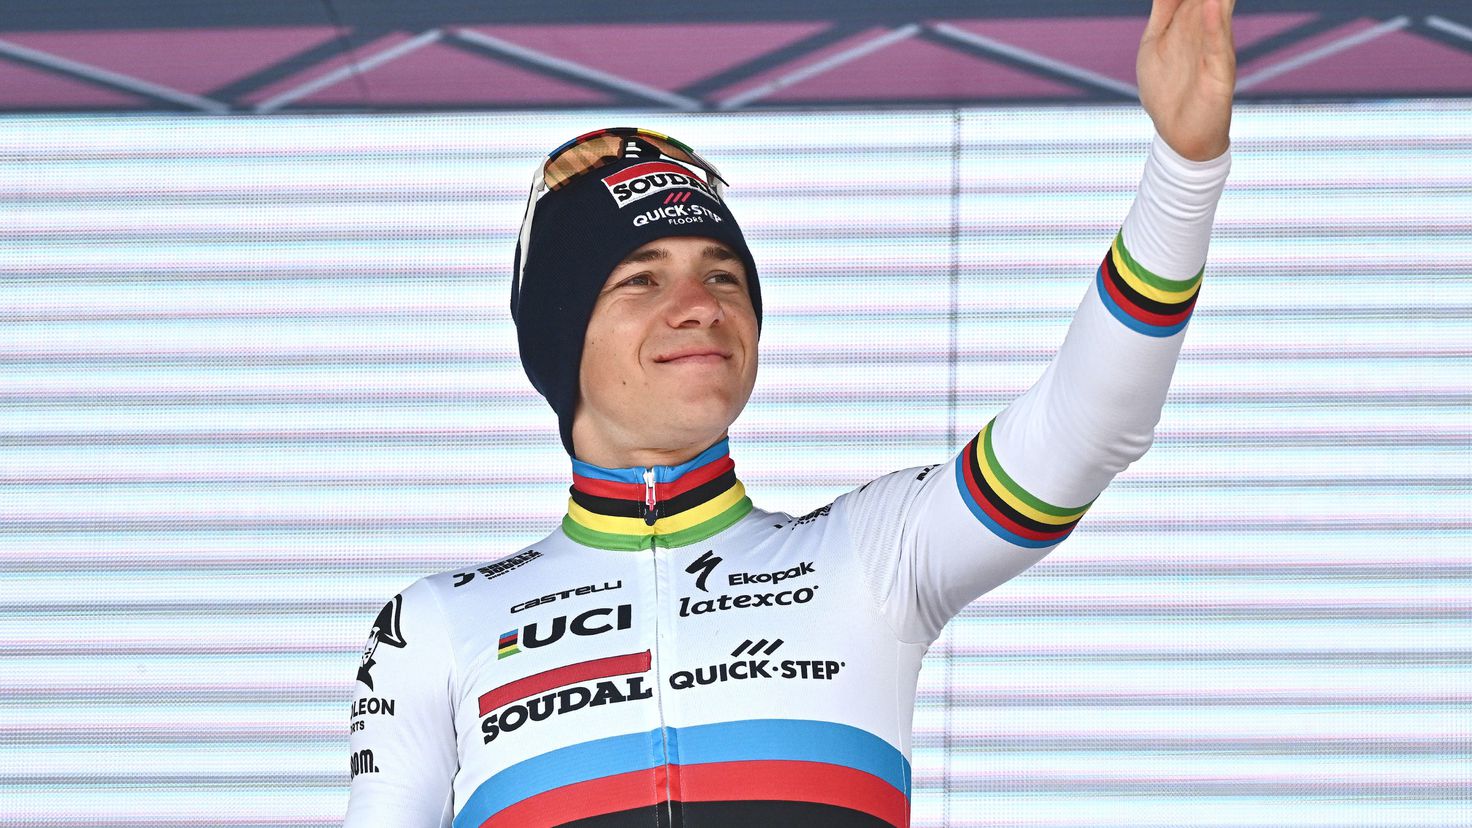 Evenepoel can compete again after overcoming COVID
